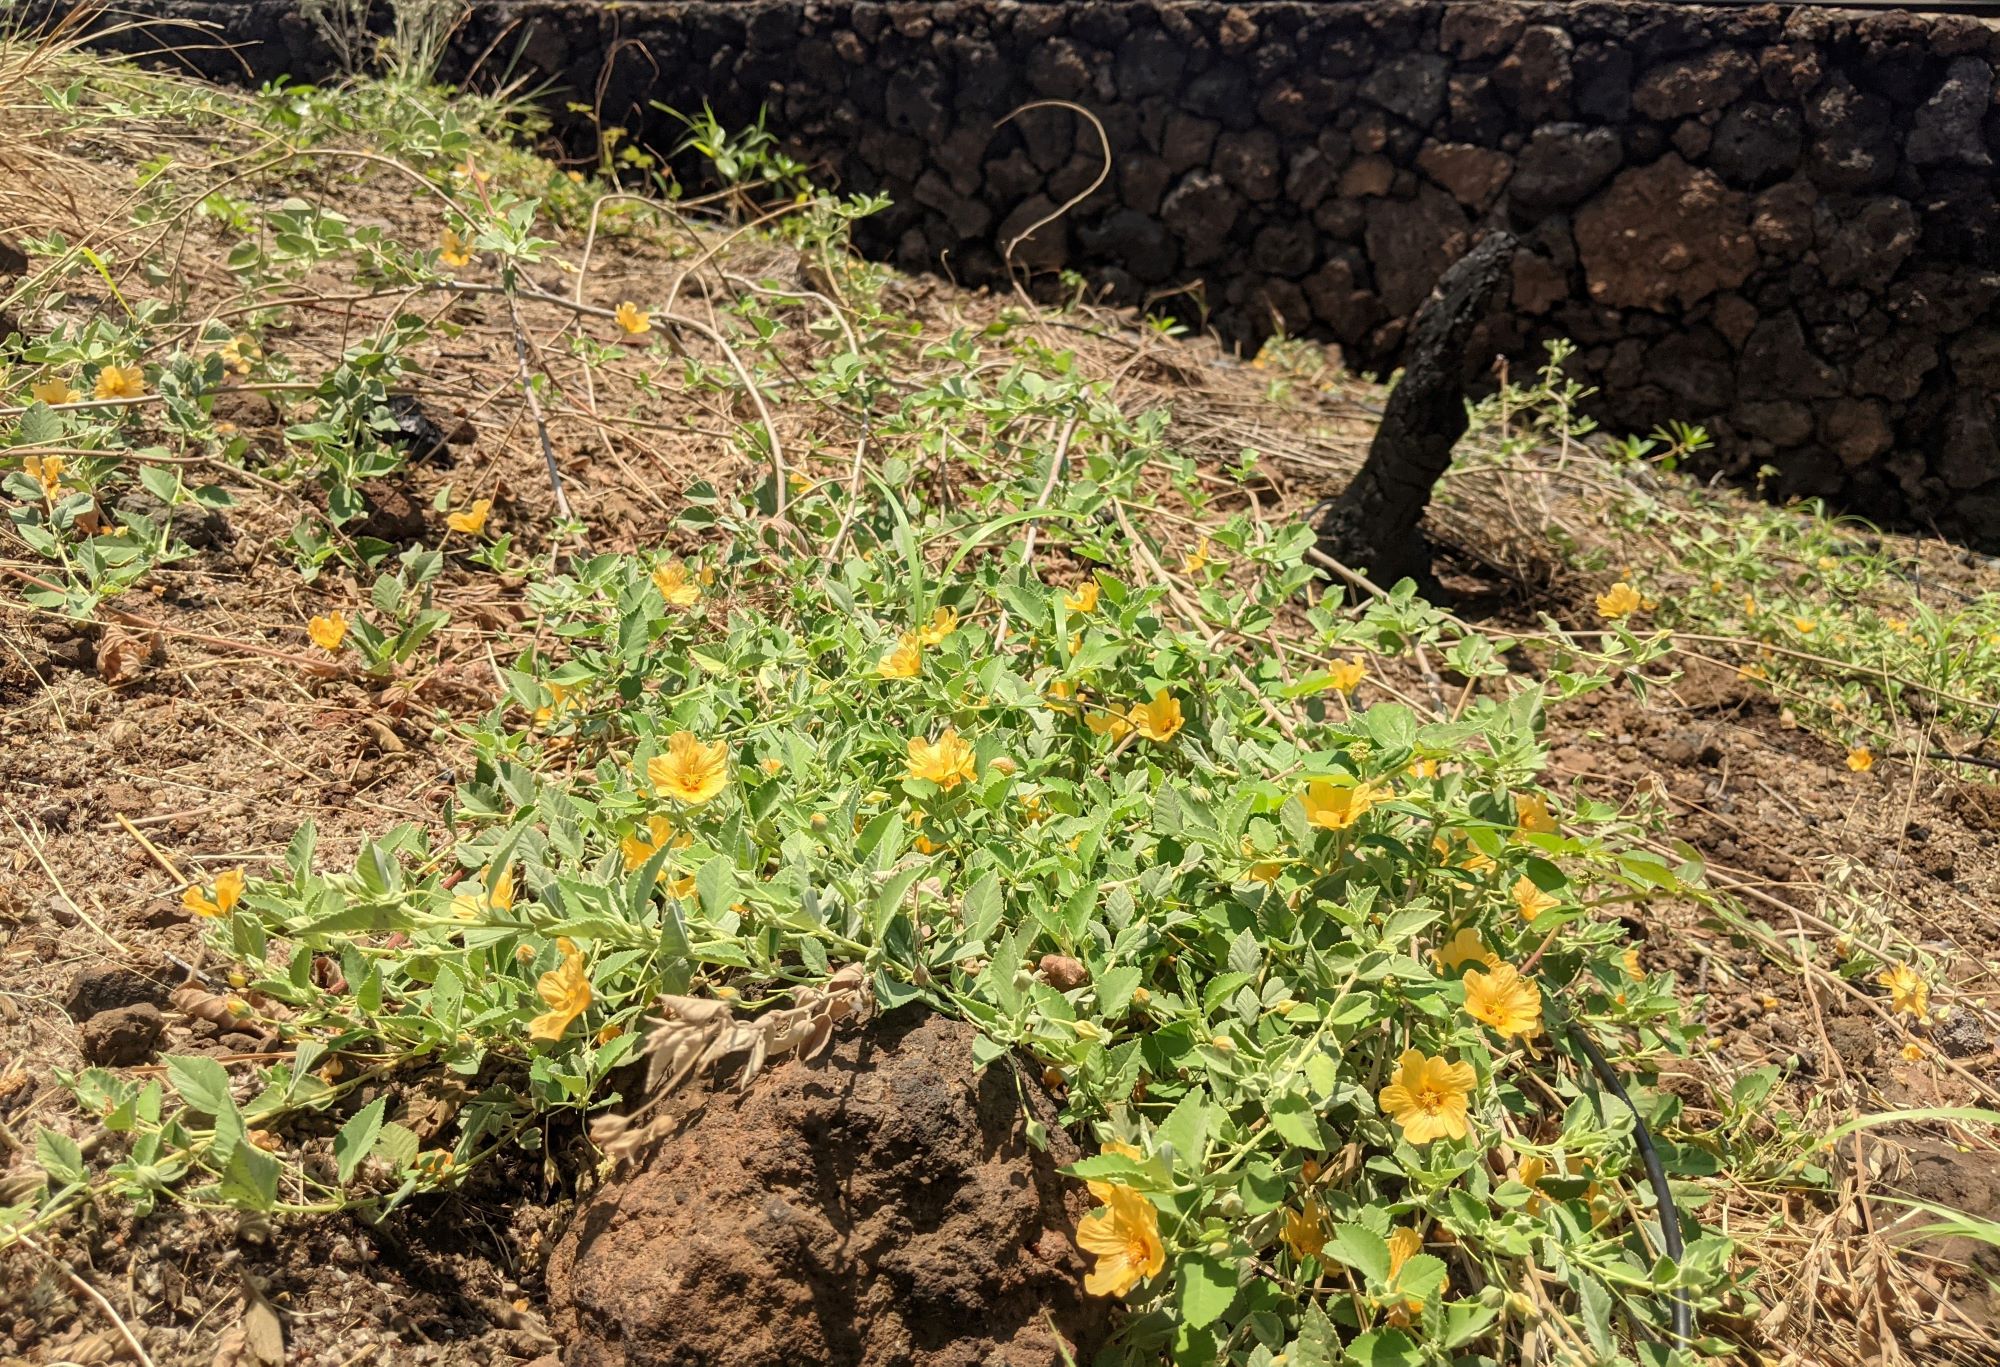 A low growing fire resistant plant called ʻilima papa planted near the newly repaired restroom